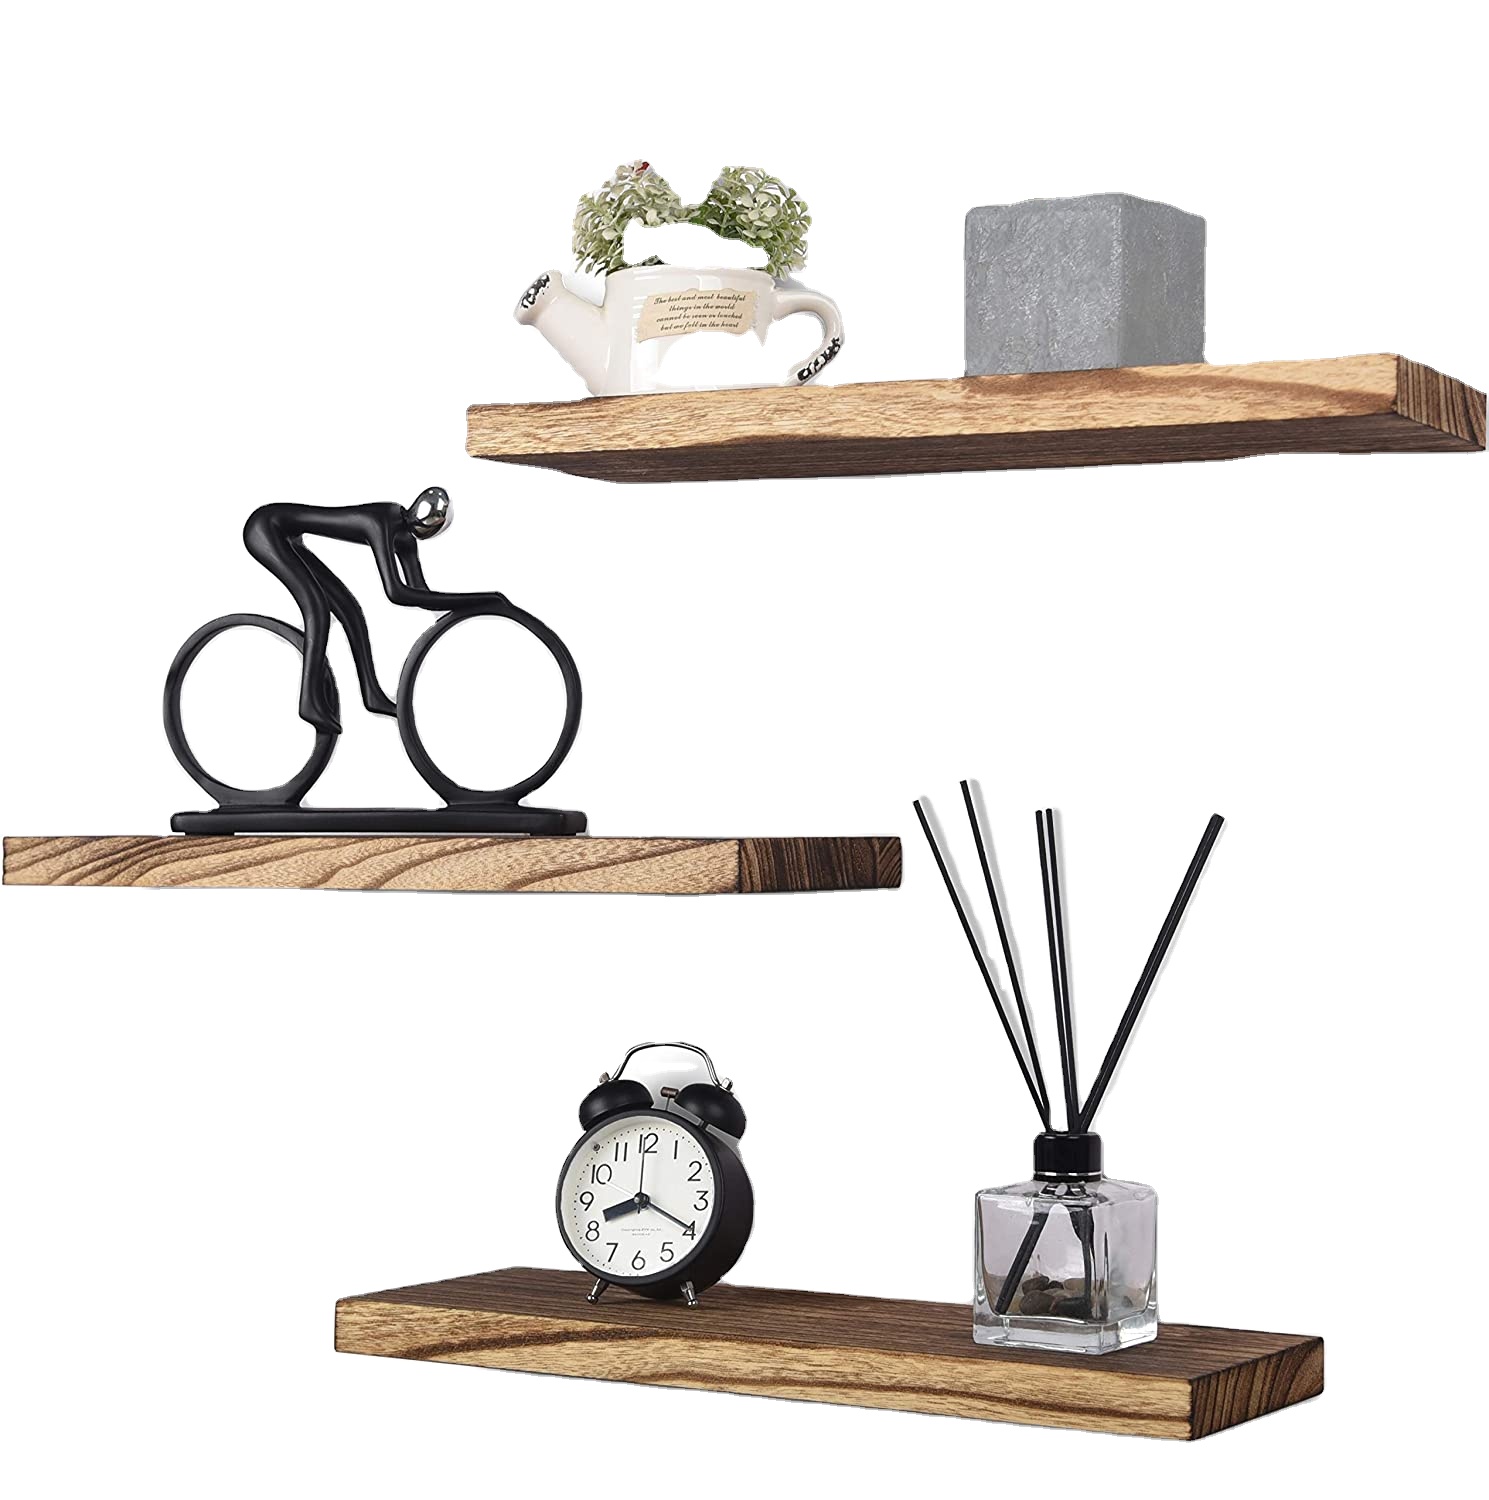 Floating Shelves Wall Mounted Modern Rustic All Wood Wall Shelves Set of 2 for Bedroom Bathroom Family Room Kitchen